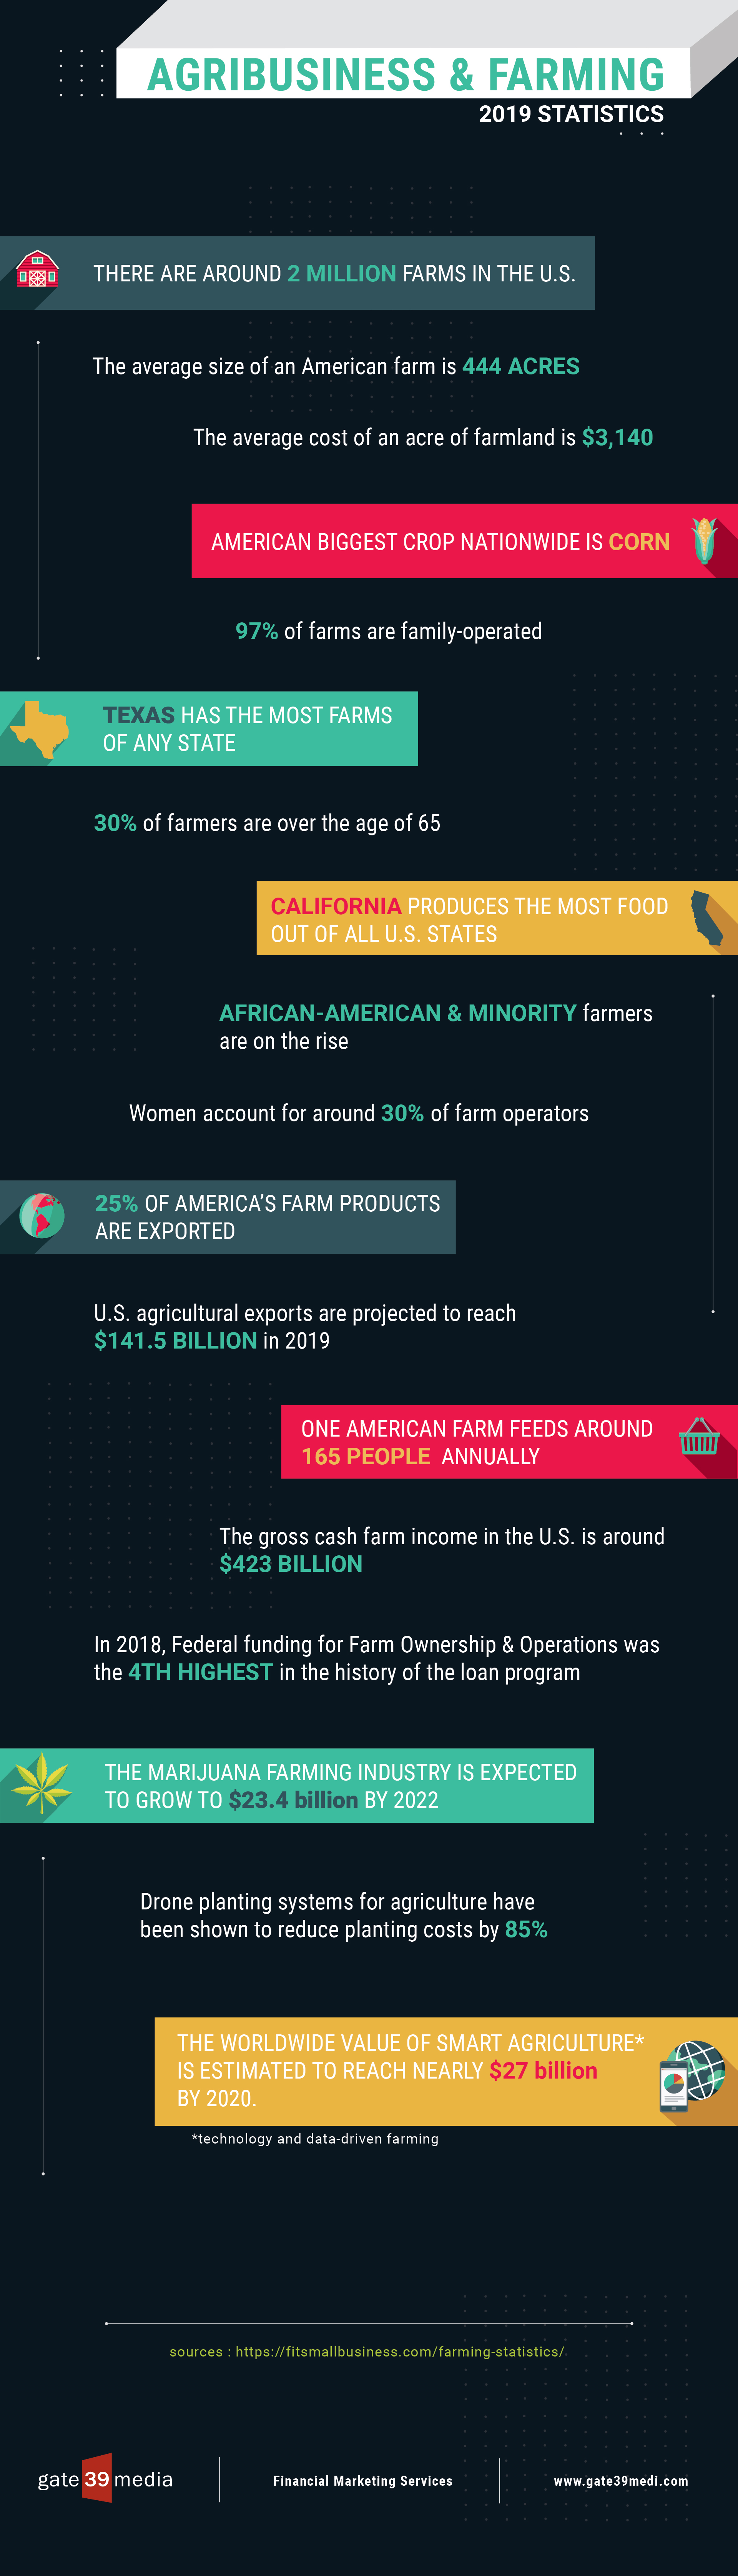 Agribusiness & Farming Stats 2019: An Infographic